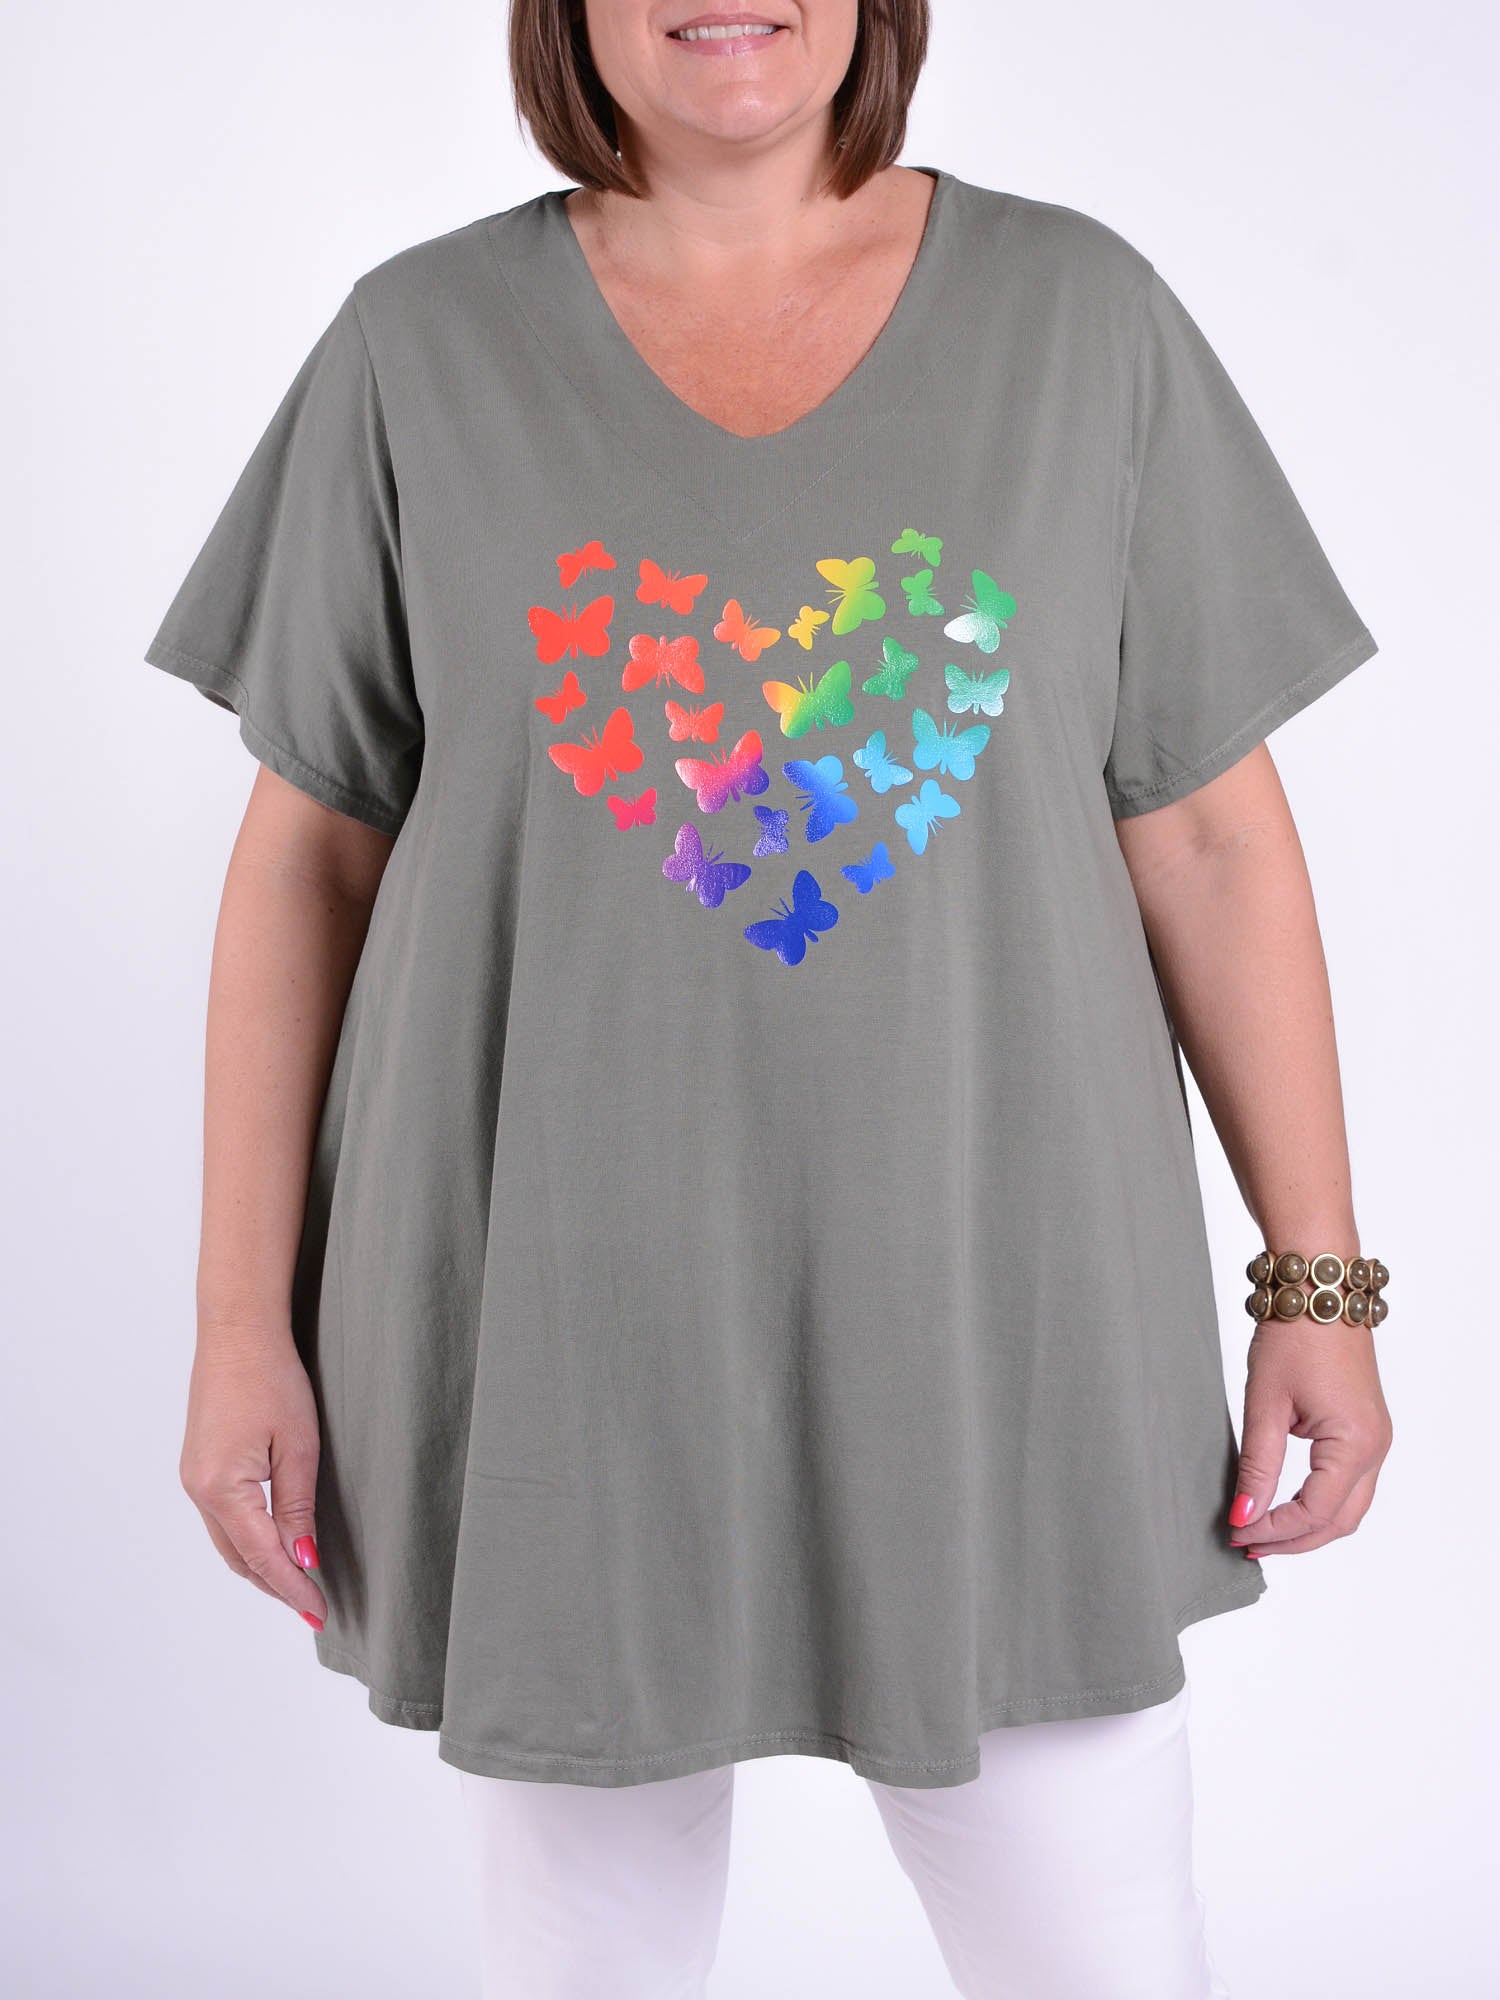 Basic Cotton Swing T Shirt - V Neck 10520 BUTTERFLIES, Tops & Shirts, Pure Plus Clothing, Lagenlook Clothing, Plus Size Fashion, Over 50 Fashion